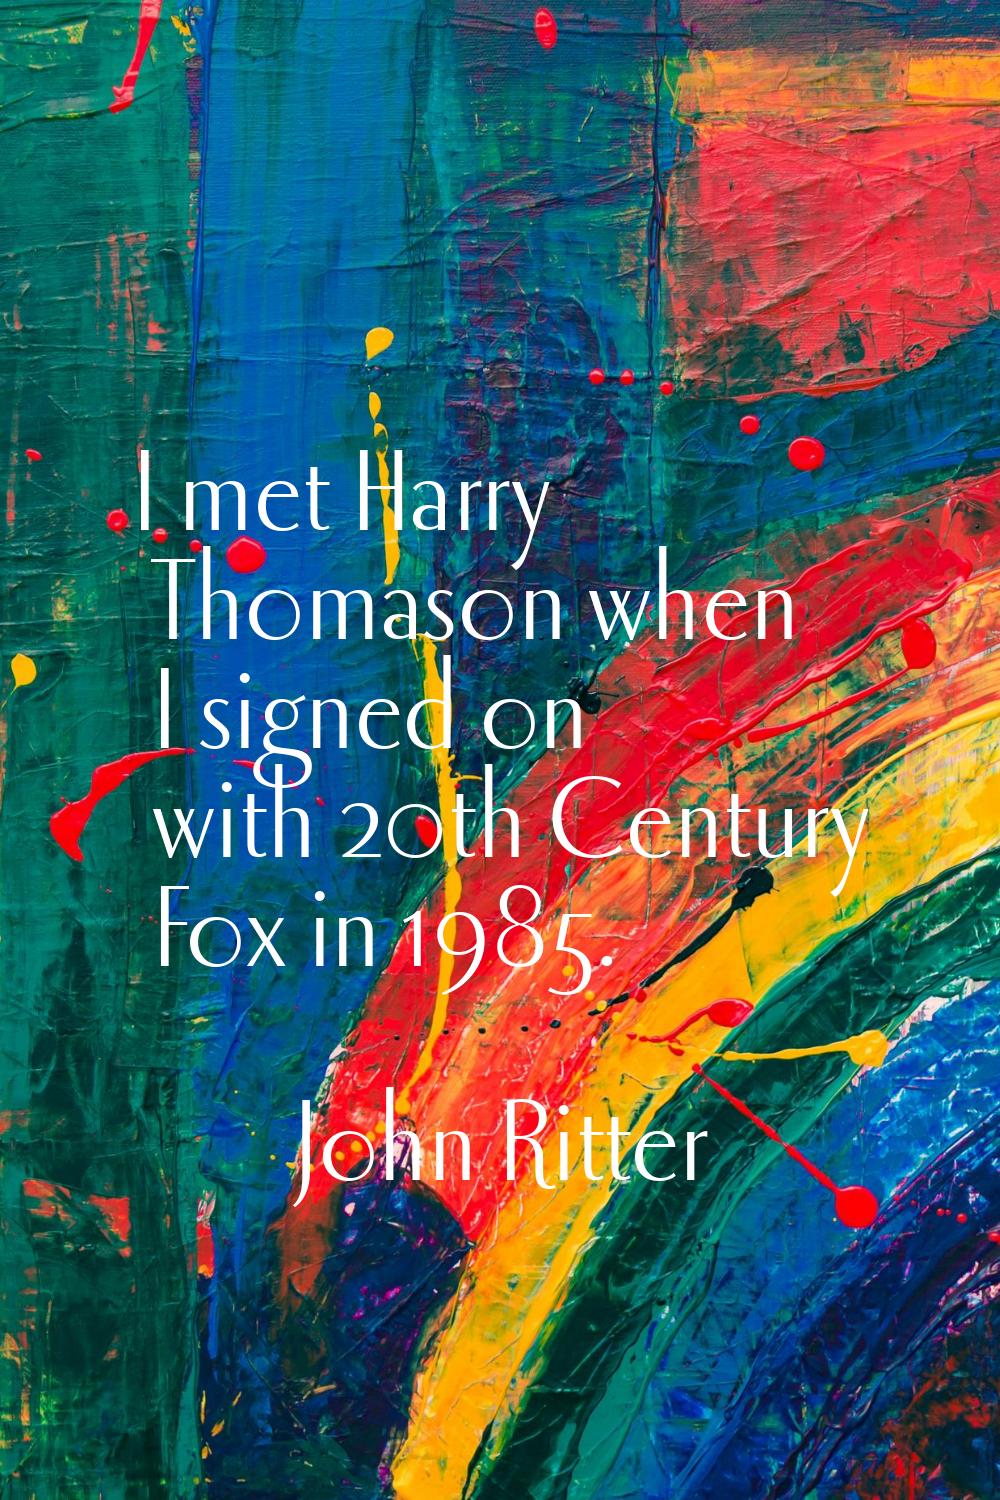 I met Harry Thomason when I signed on with 20th Century Fox in 1985.